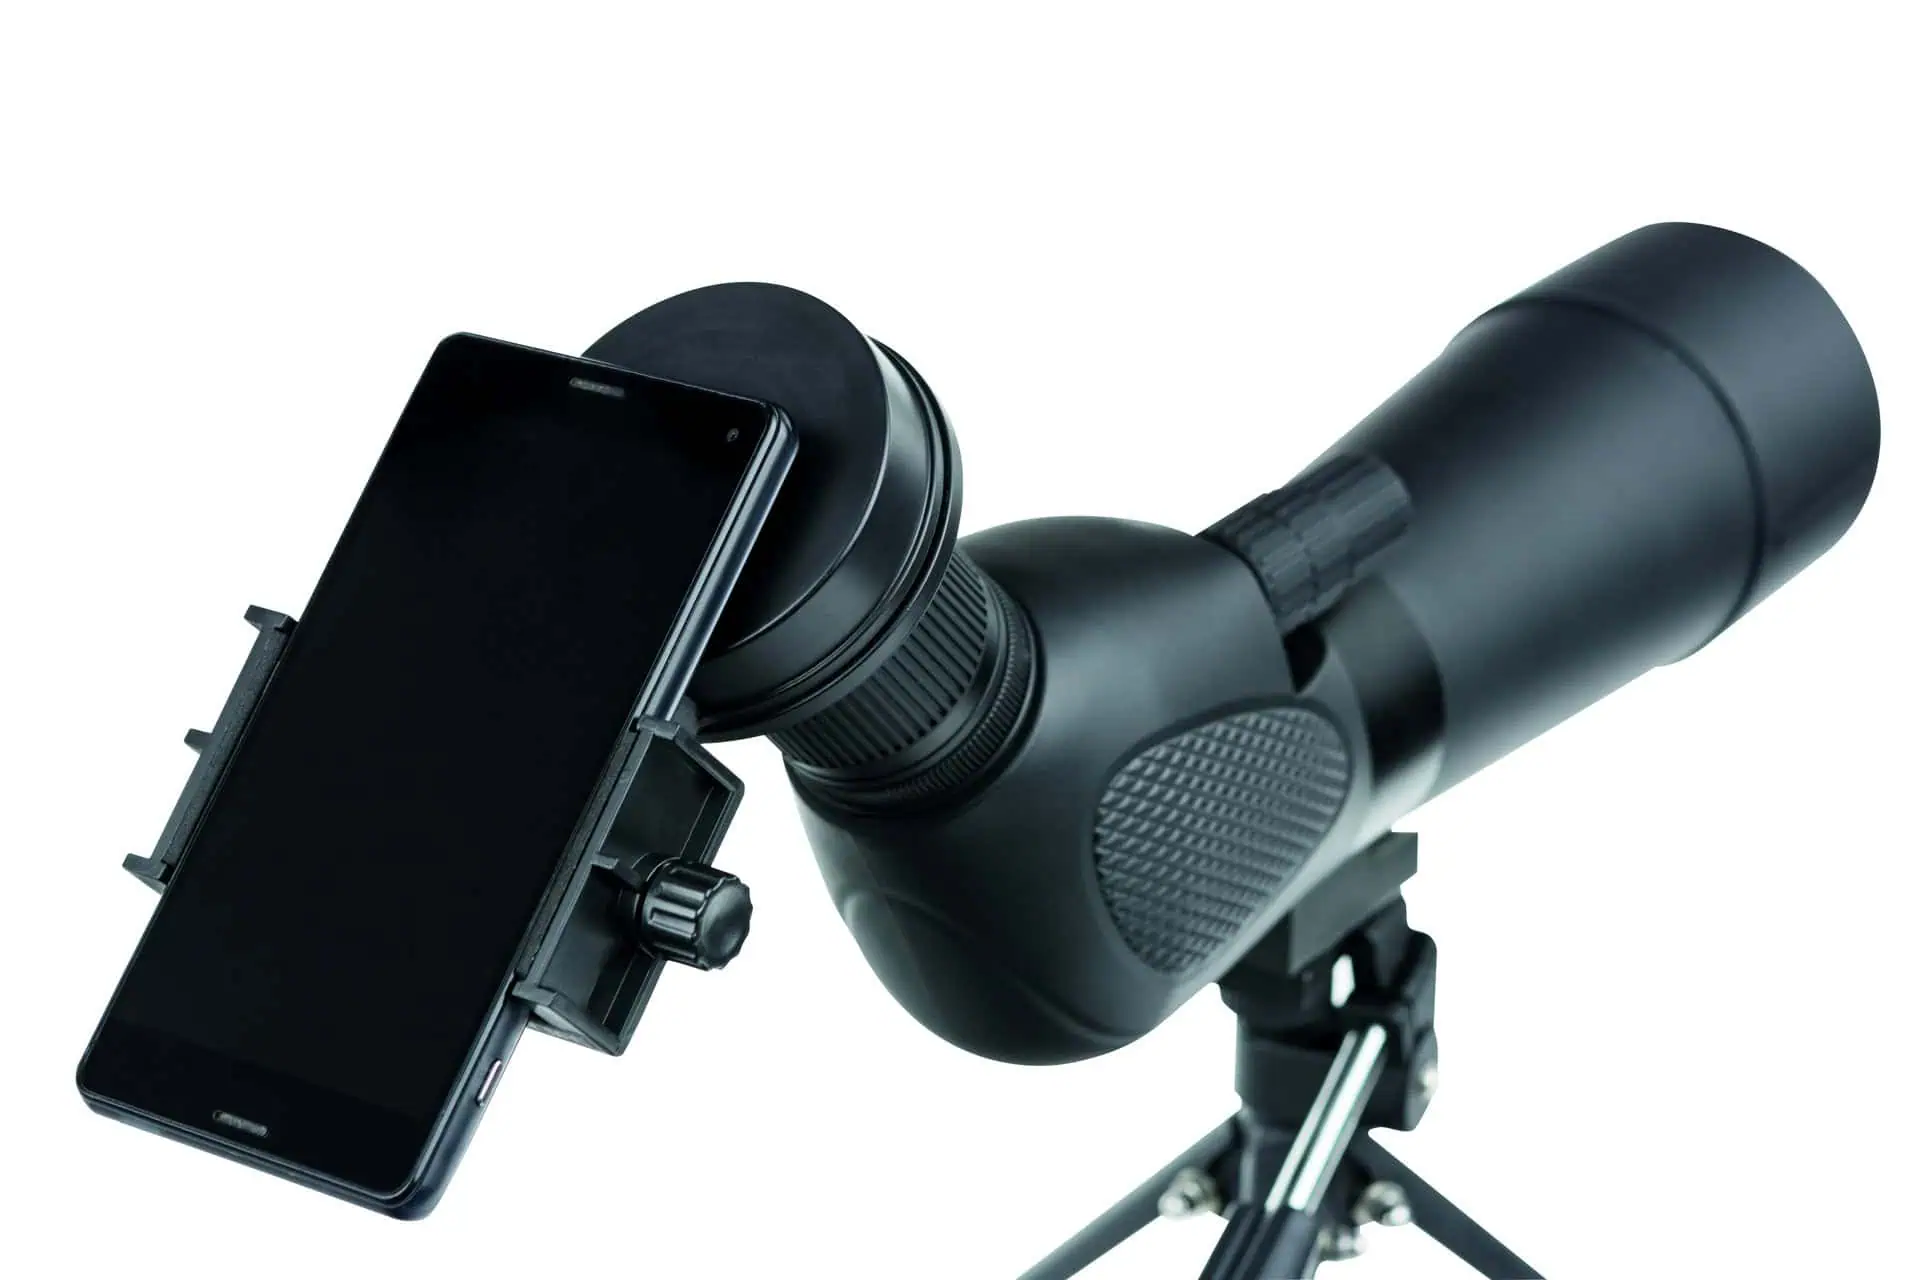 Universal smartphone photo adapter SA-1 for spotting scopes